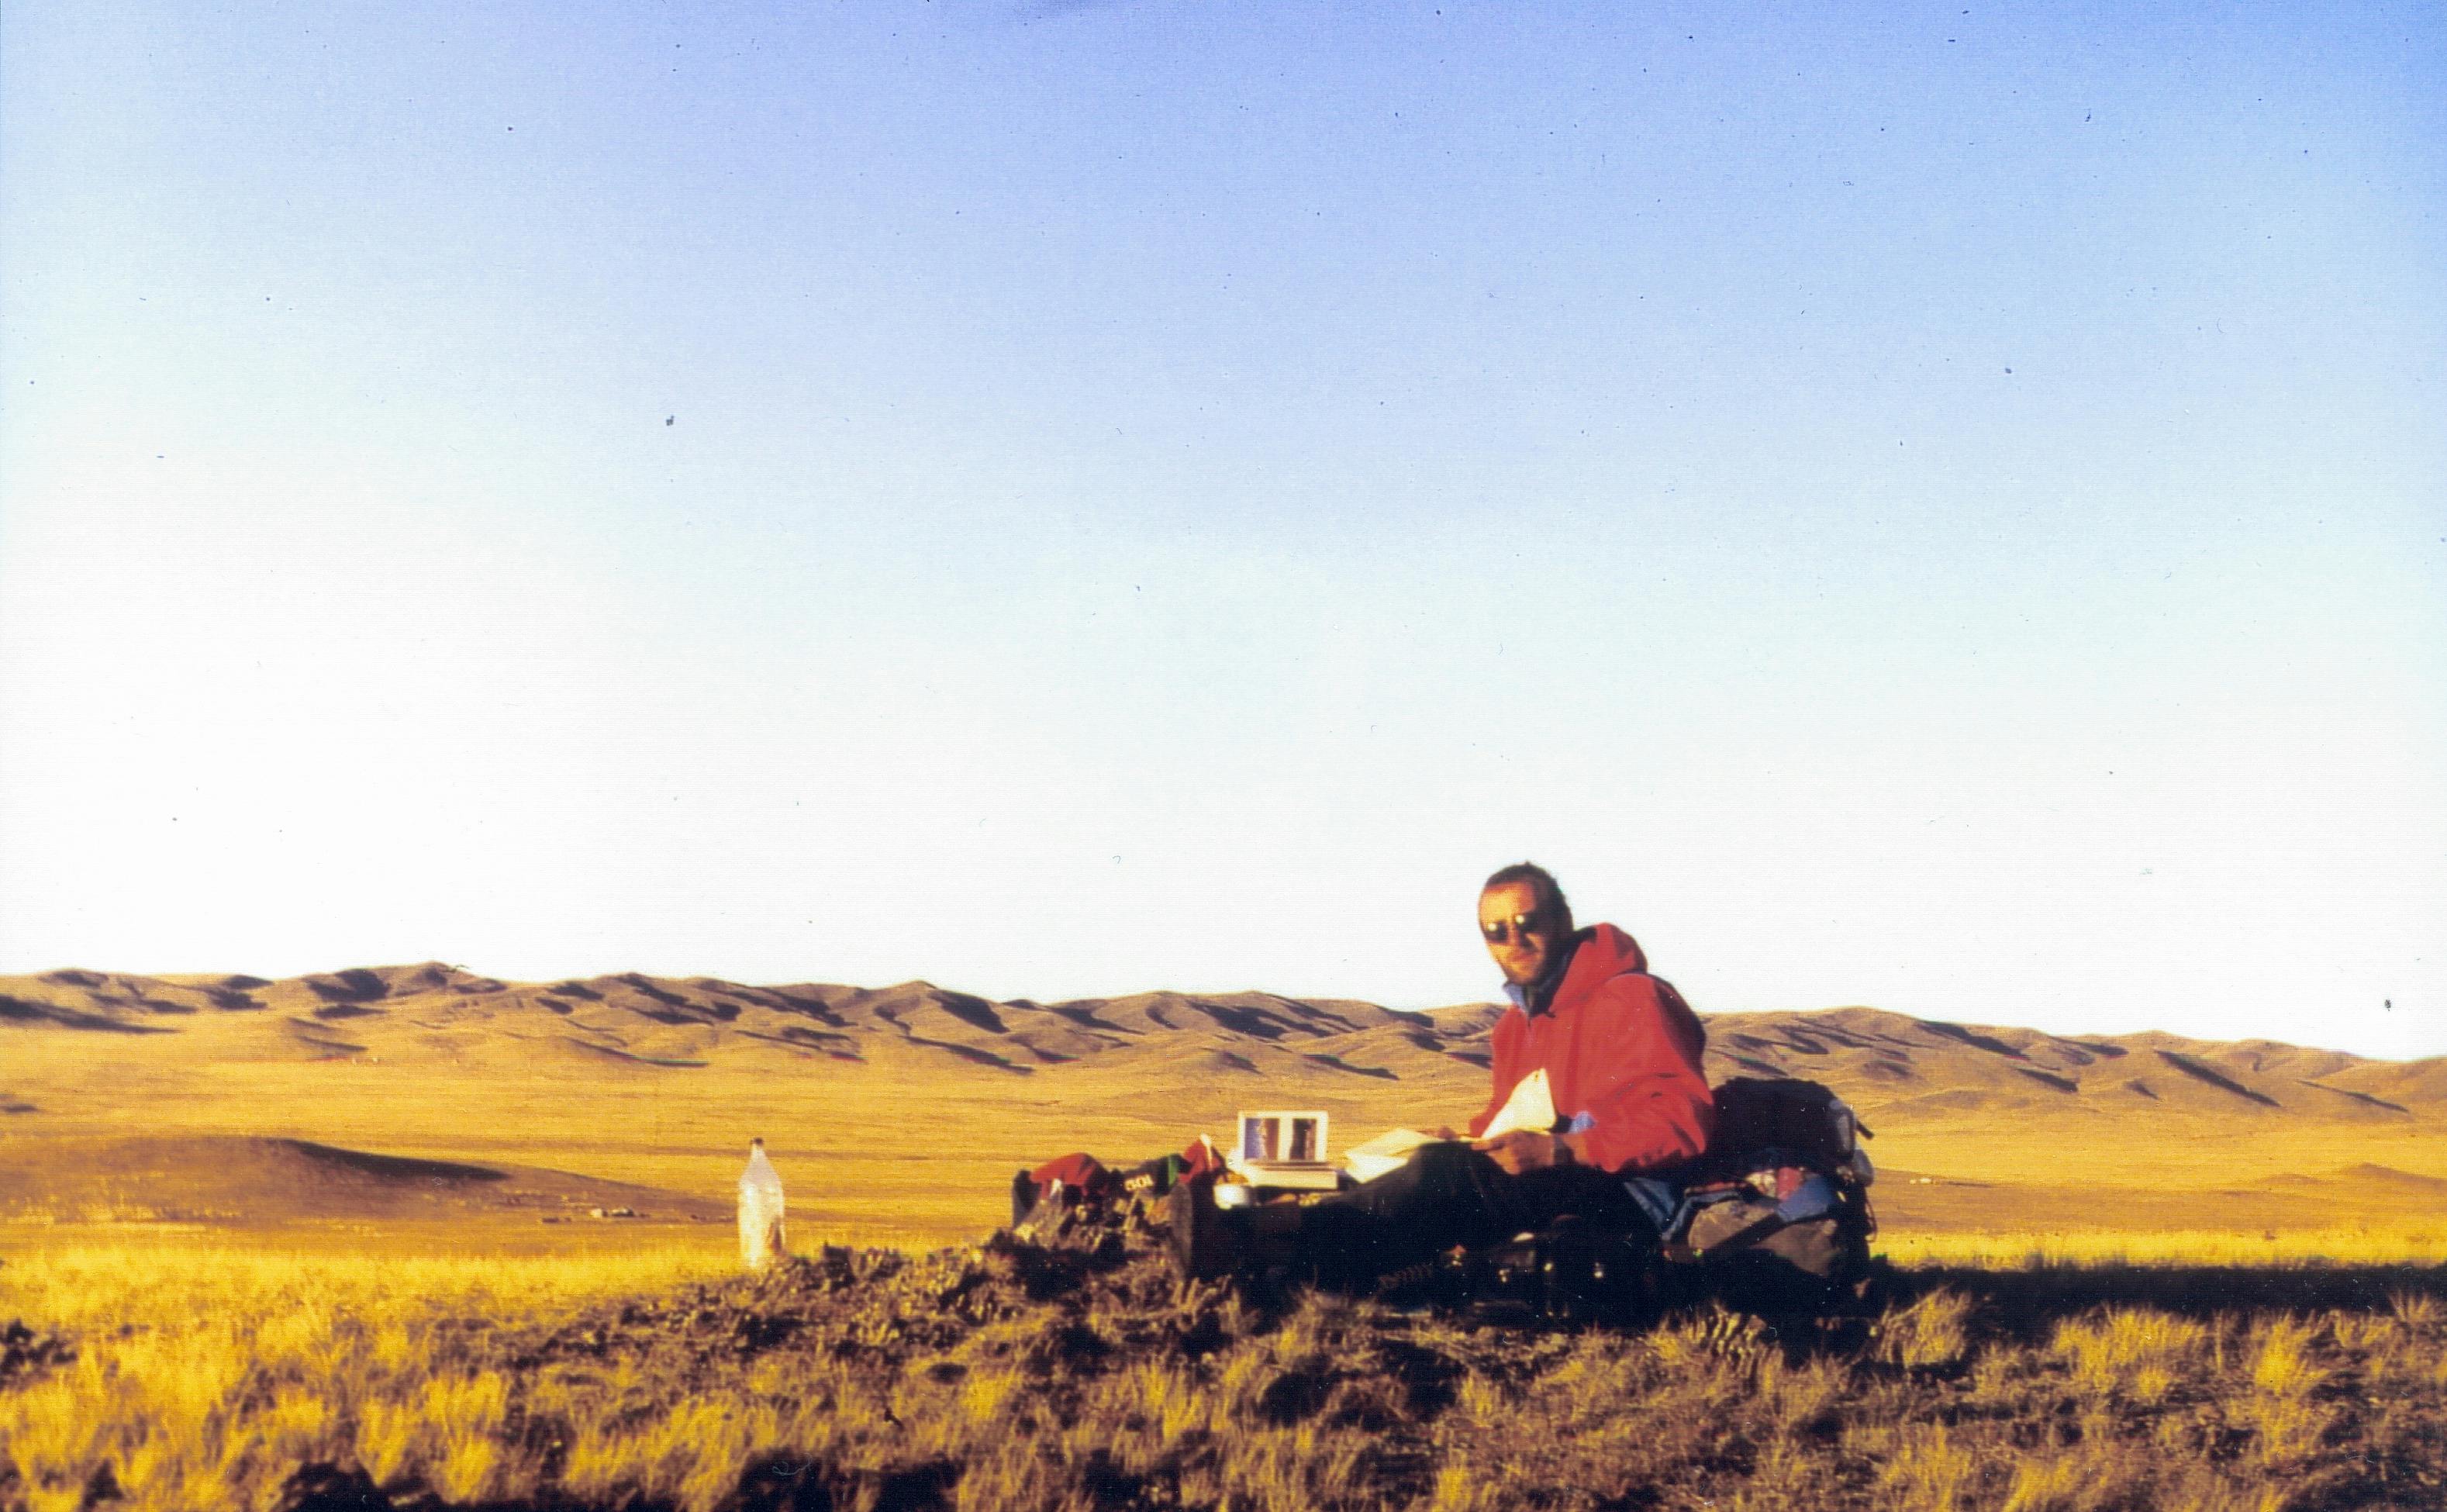 Travel diary writing in Mongolia (Asia at Dawn, 1994)